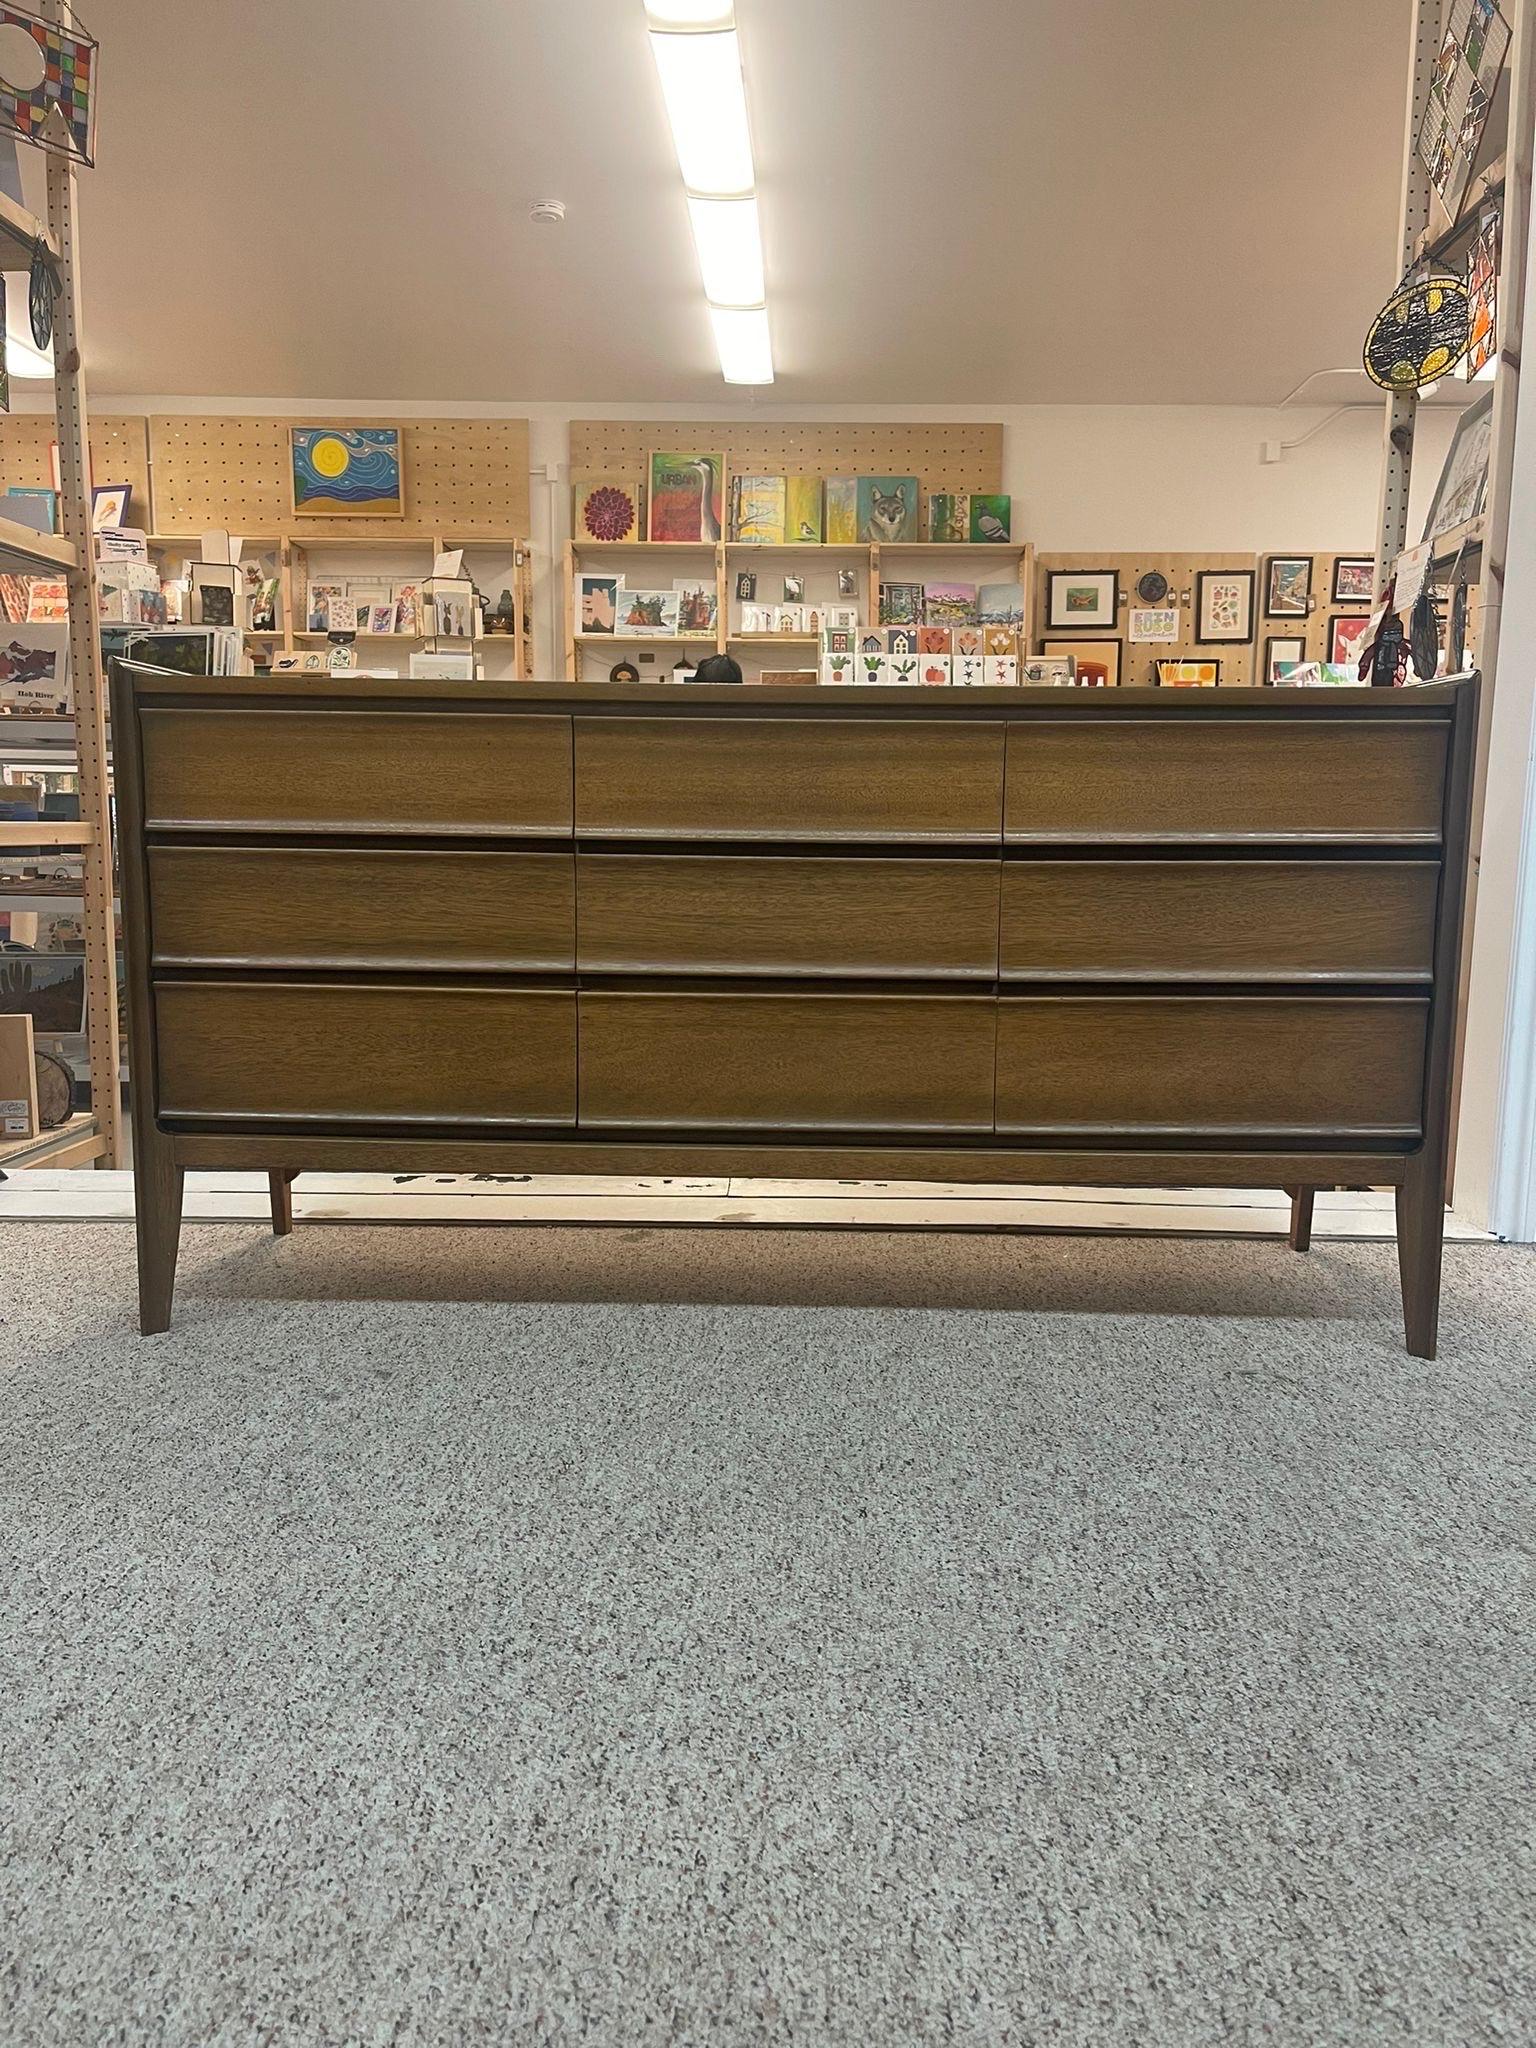 This Sleek 9 Drawer Dresser by United has Dovetail Drawers and Tapered Legs. Vintage Condition Consistent with Age as Pictured.

Dimensions. 60 W ; 18 D ; 30 1/2 H